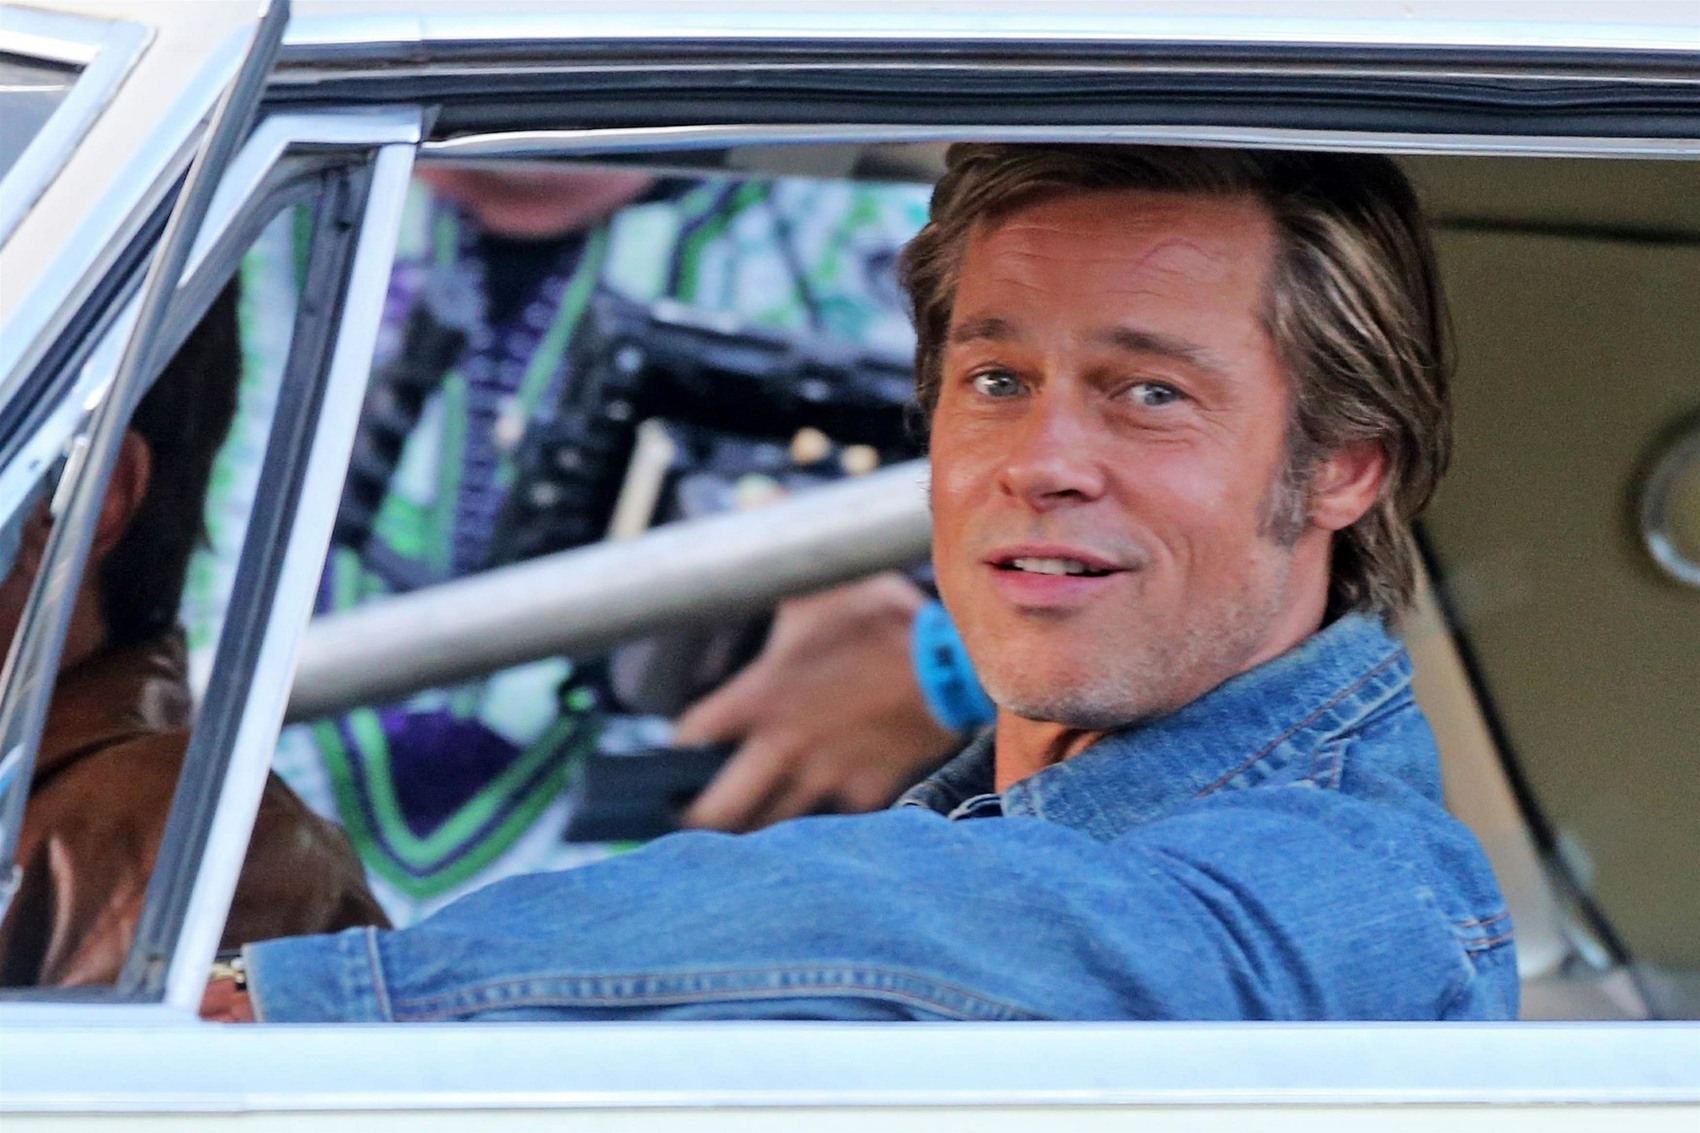 Brad Pitt and Leonardo DiCaprio back in their car on the set of 'Once Upon a Time in Hollywood'